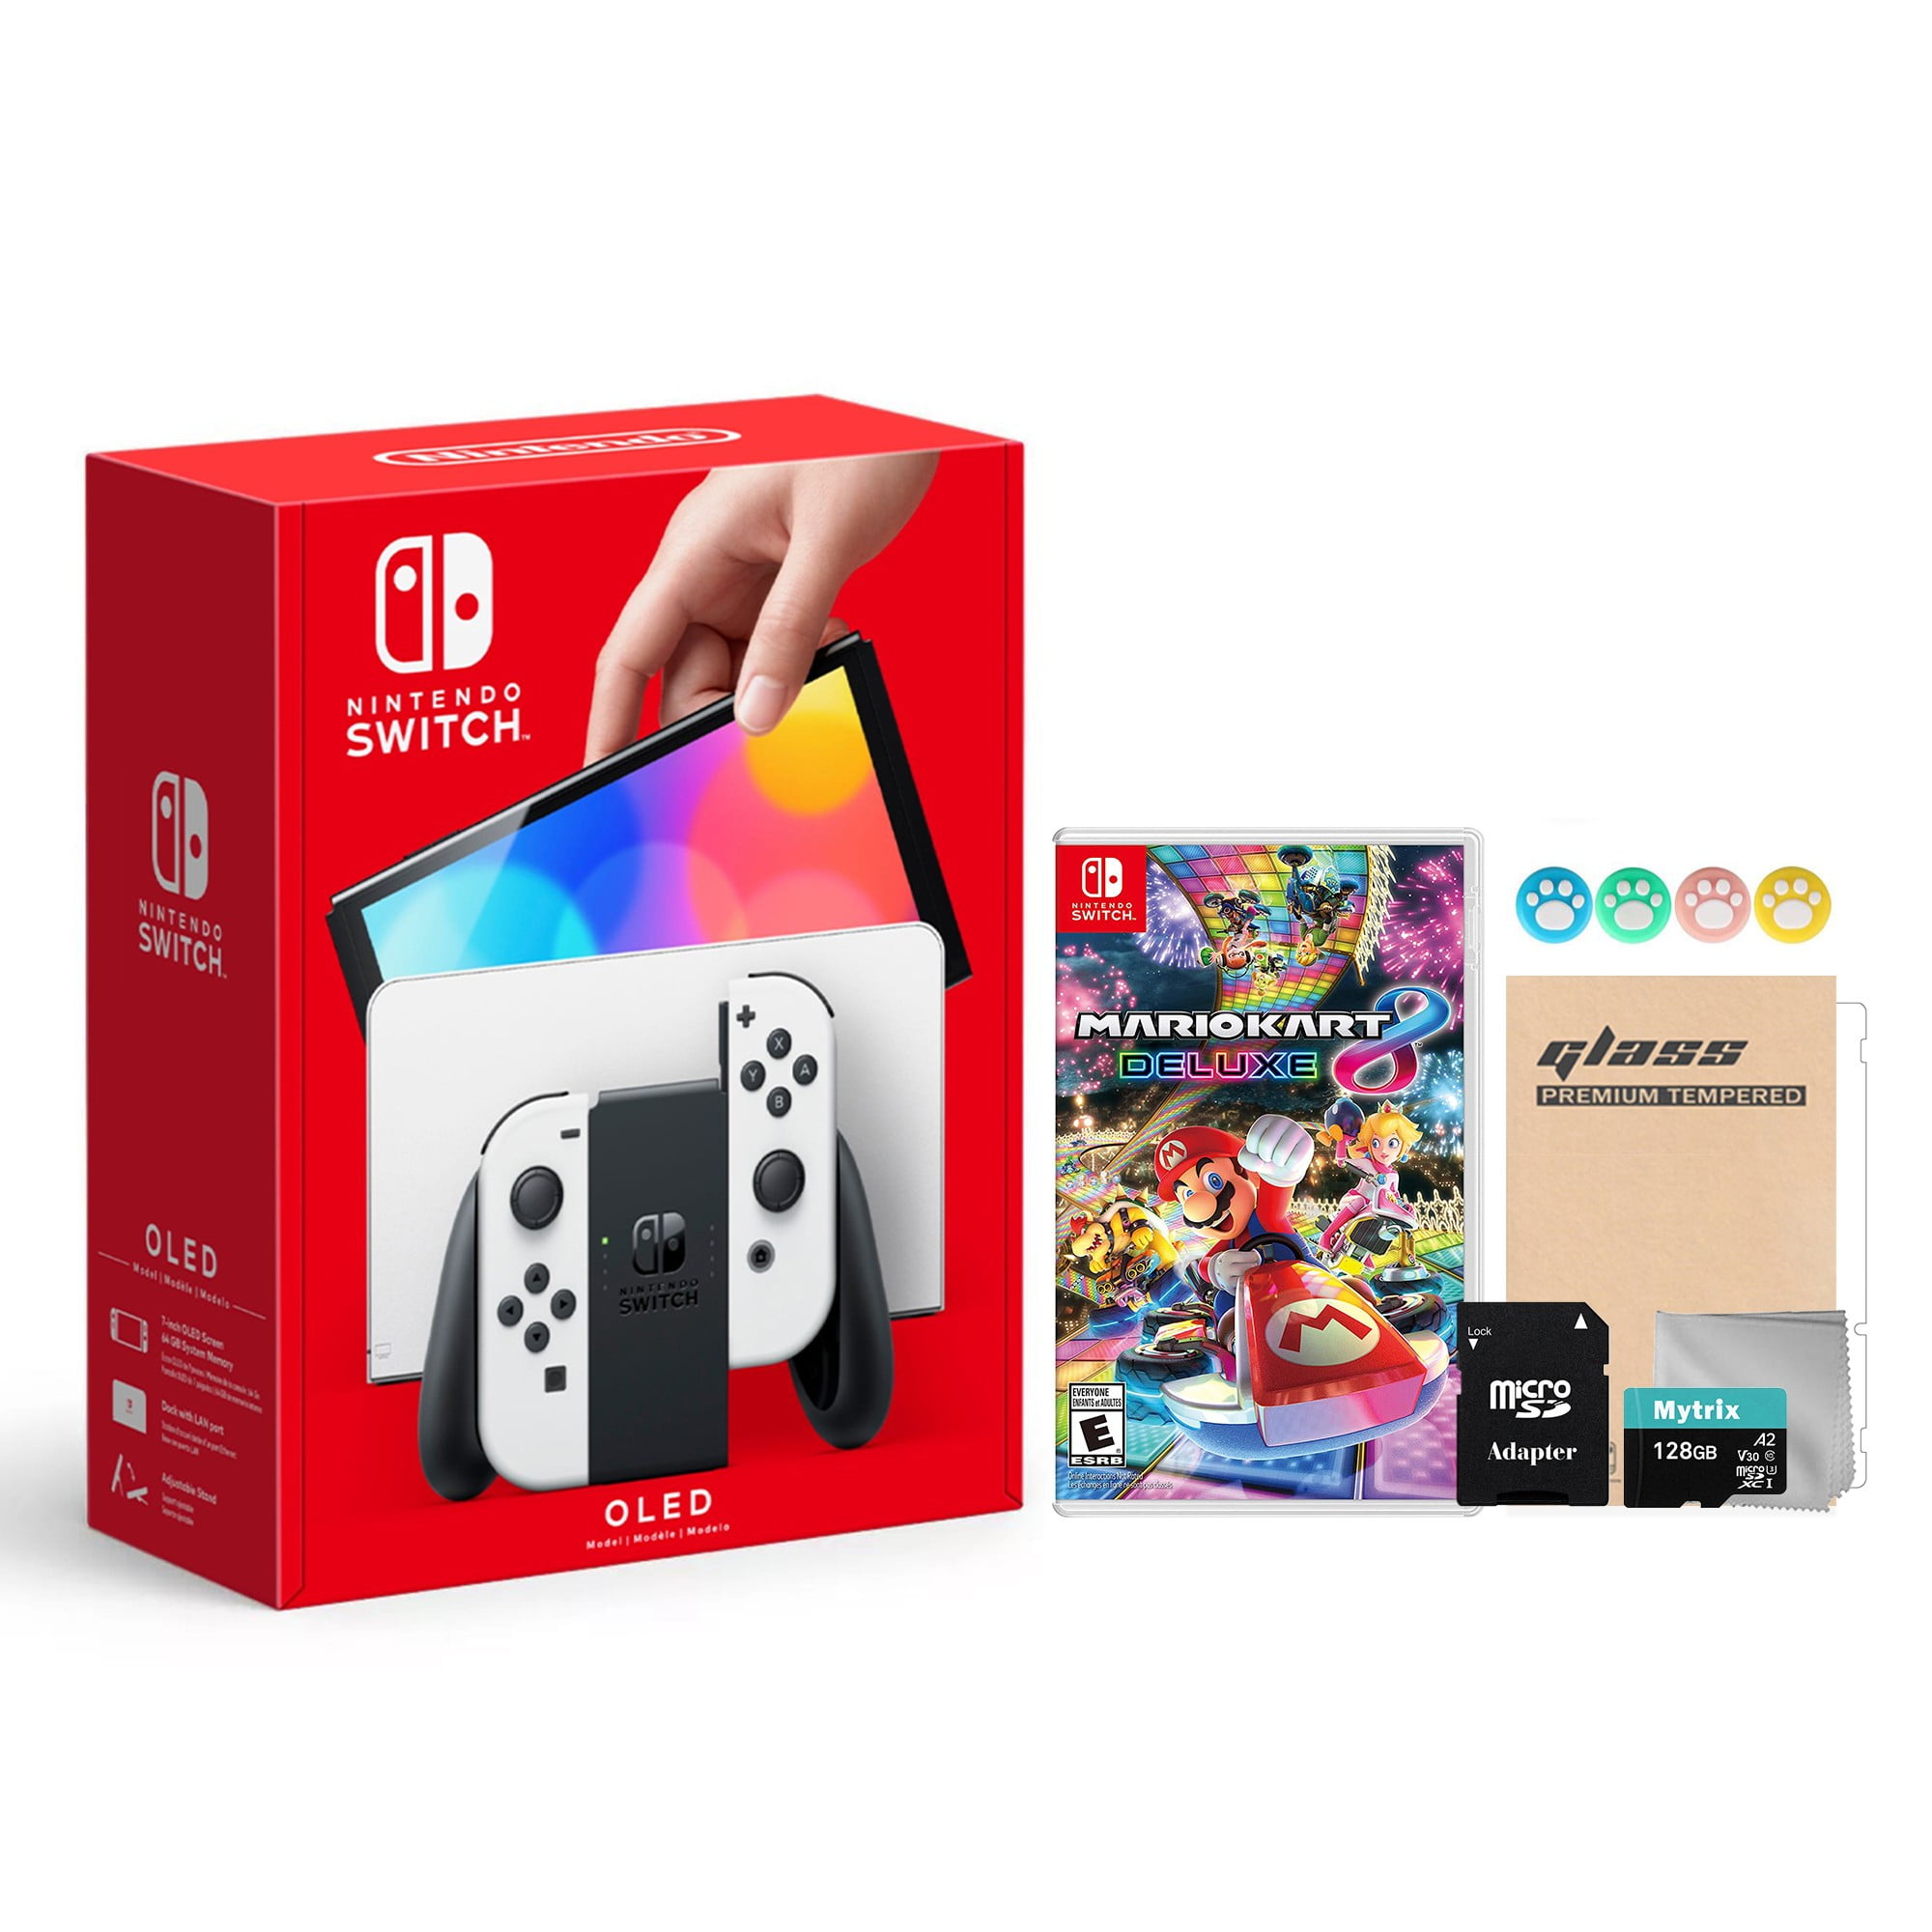 2021 New Nintendo Switch OLED Model White Joy Con 64GB Console Improved HD  Screen & LAN-Port Dock with Super Mario 3D World + Bowser's Fury And Mytrix  